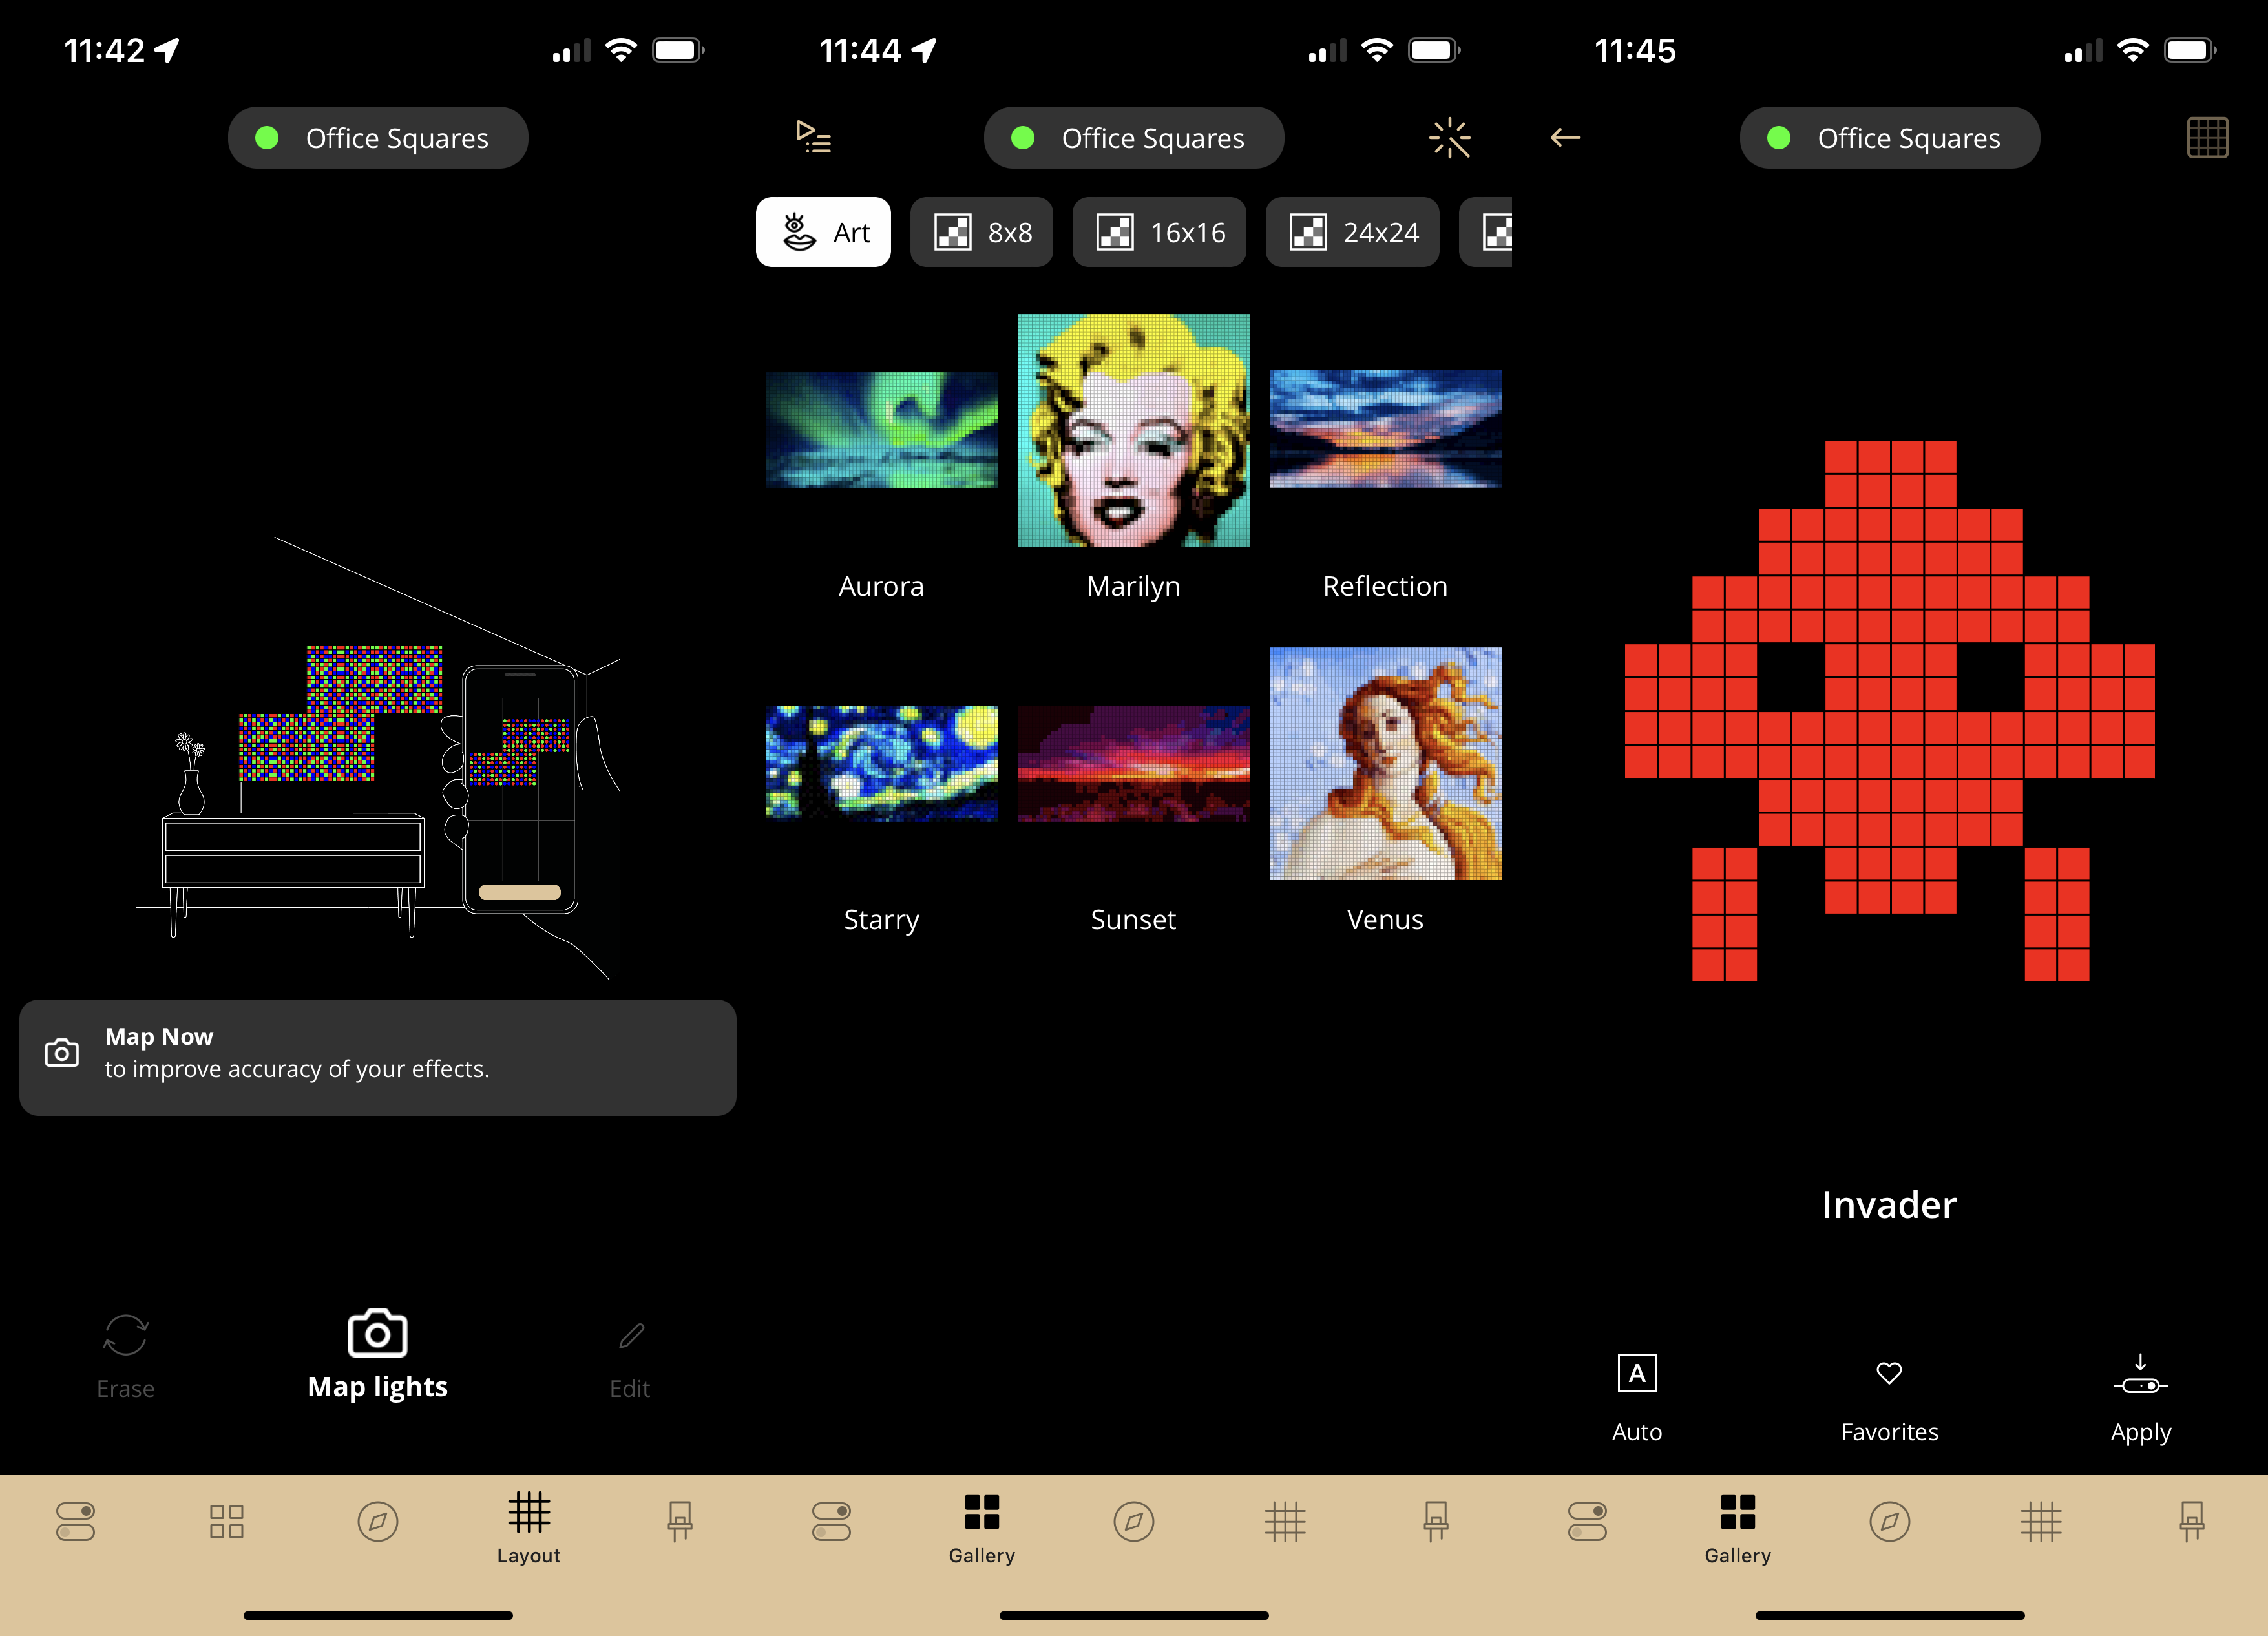 Twinkly Squares app designs